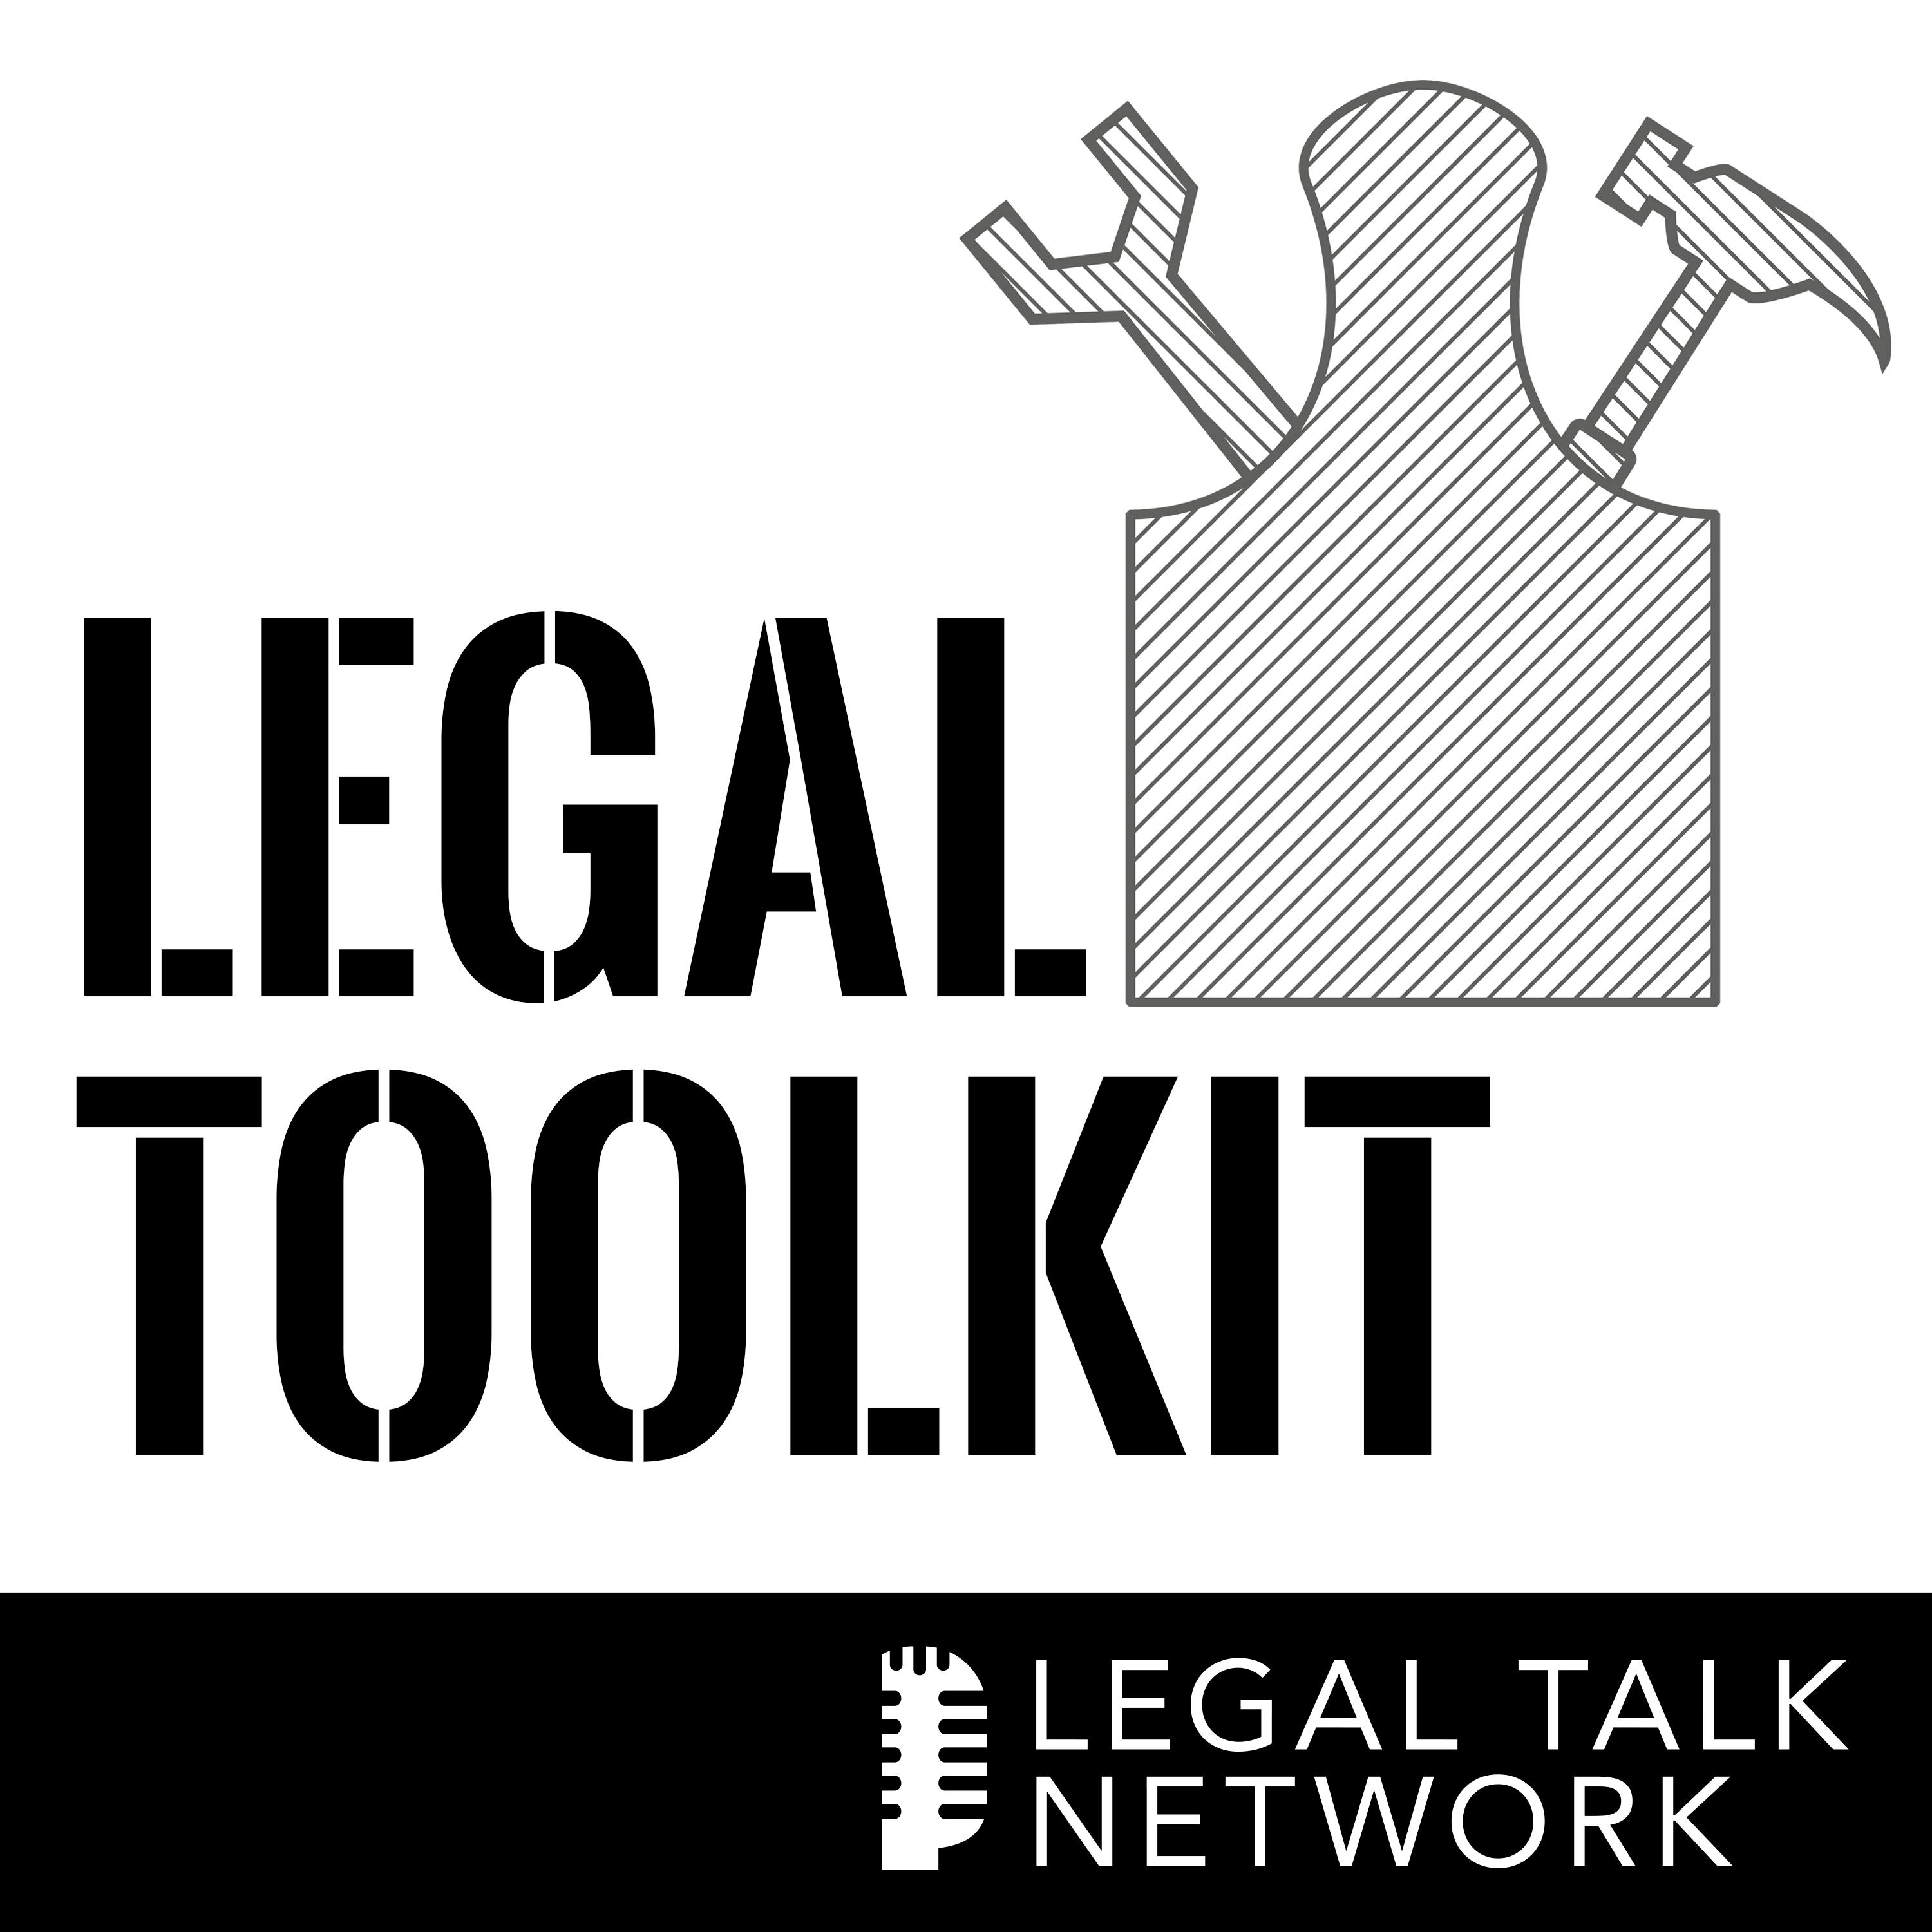 Legal Toolkit Podcast - Legal Talk Network